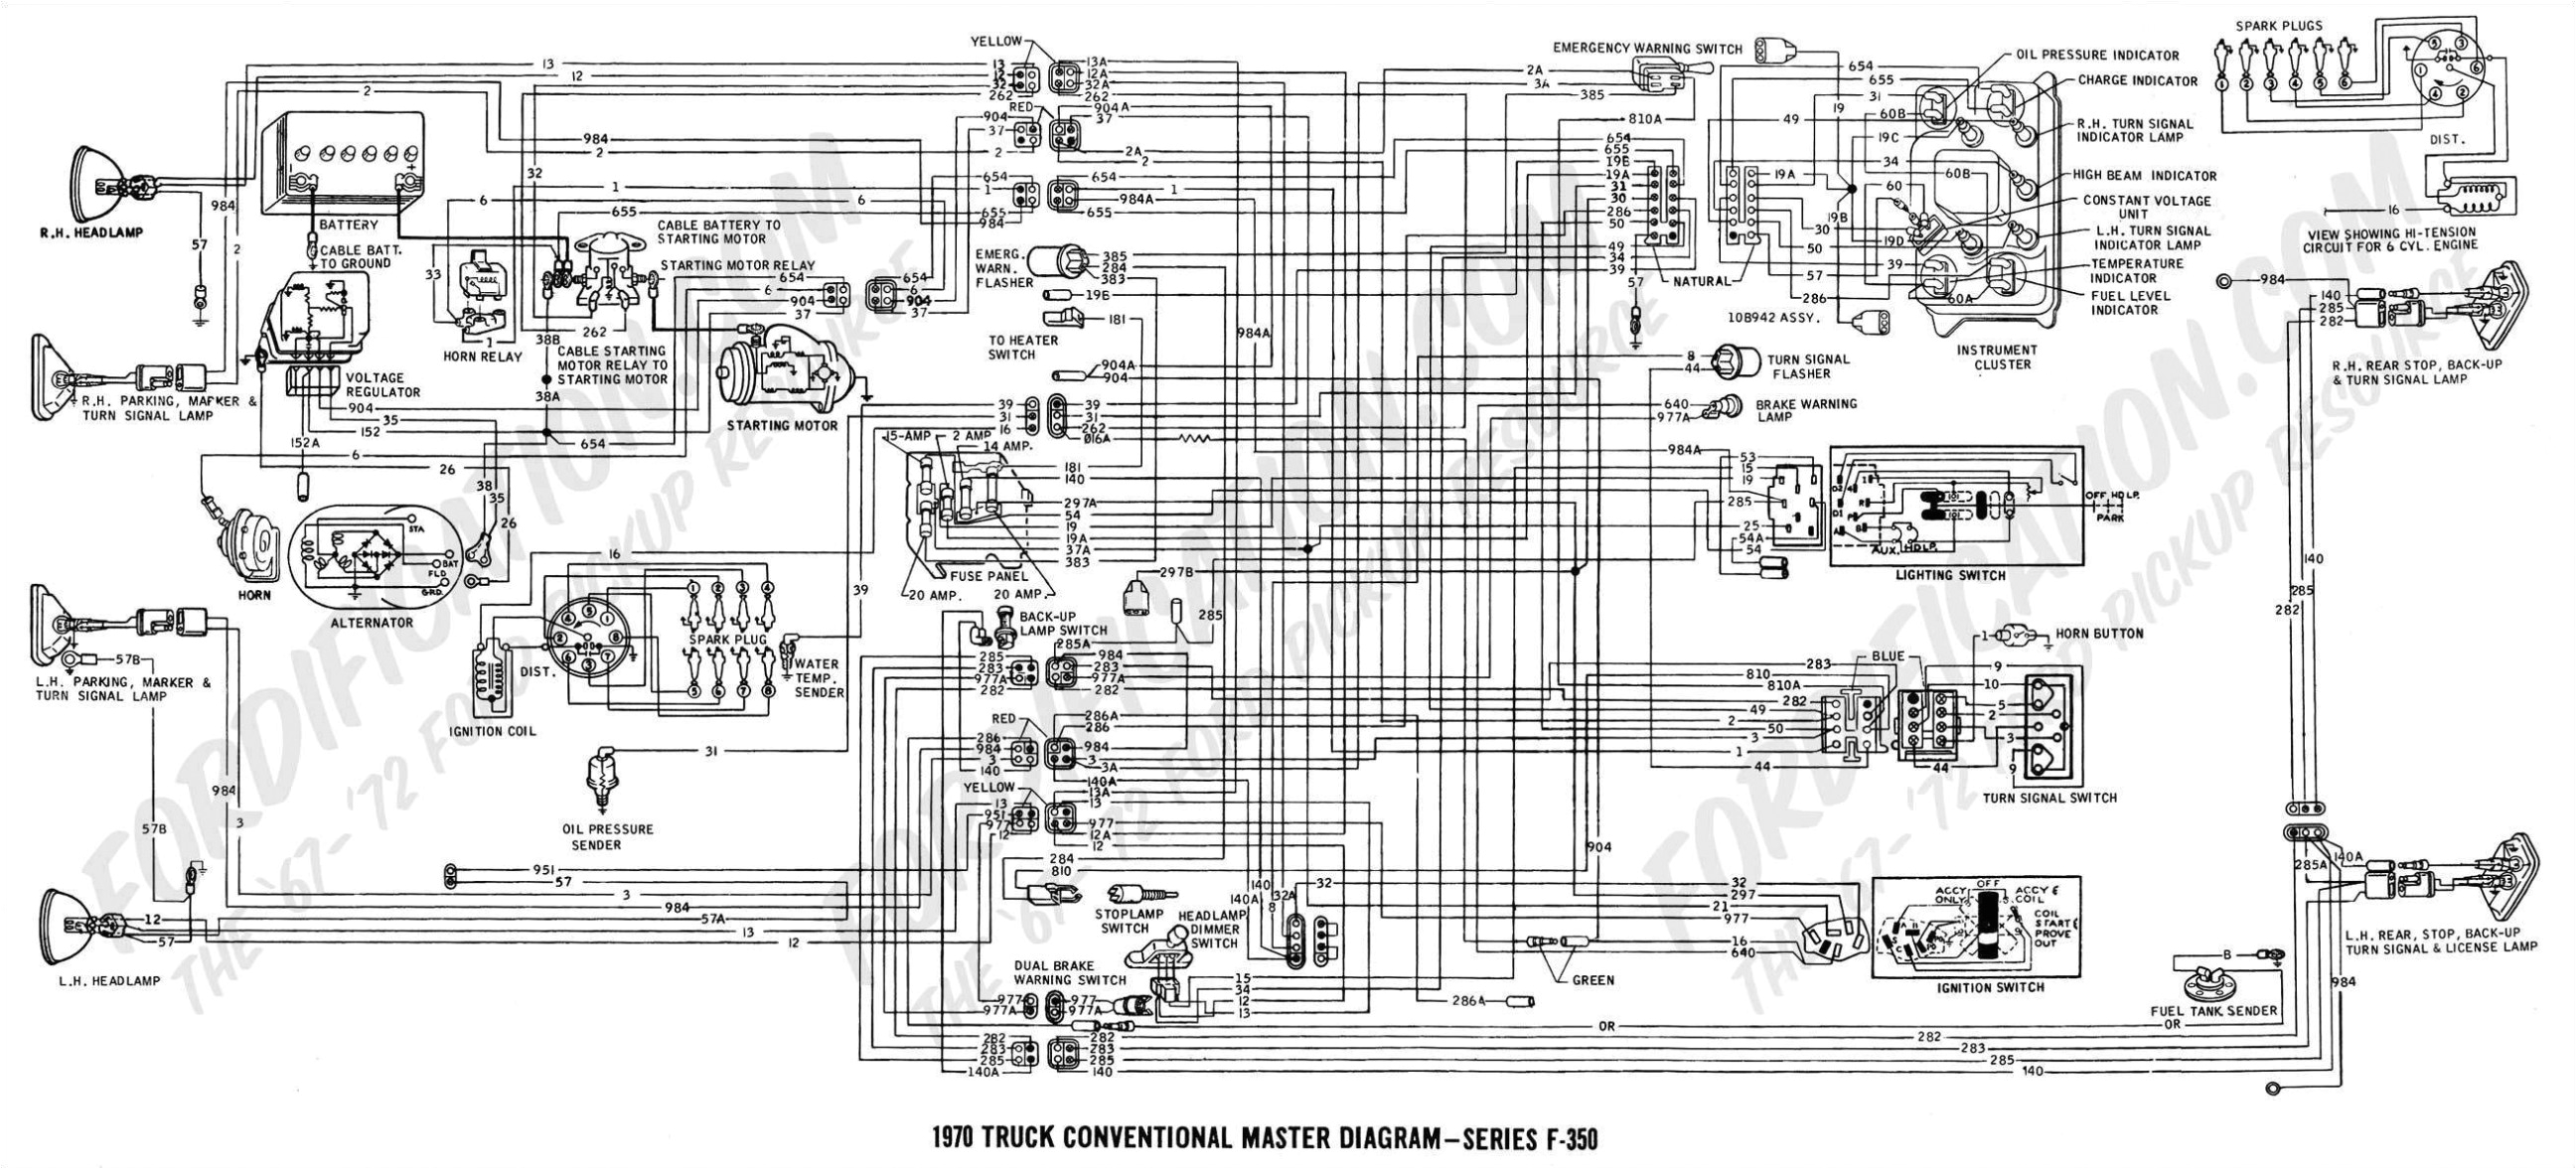 1999 f350 ignition switch diagram wiring diagram host 1999 ford explorer ignition switch wiring diagram 1999 f250 ignition switch wiring diagram